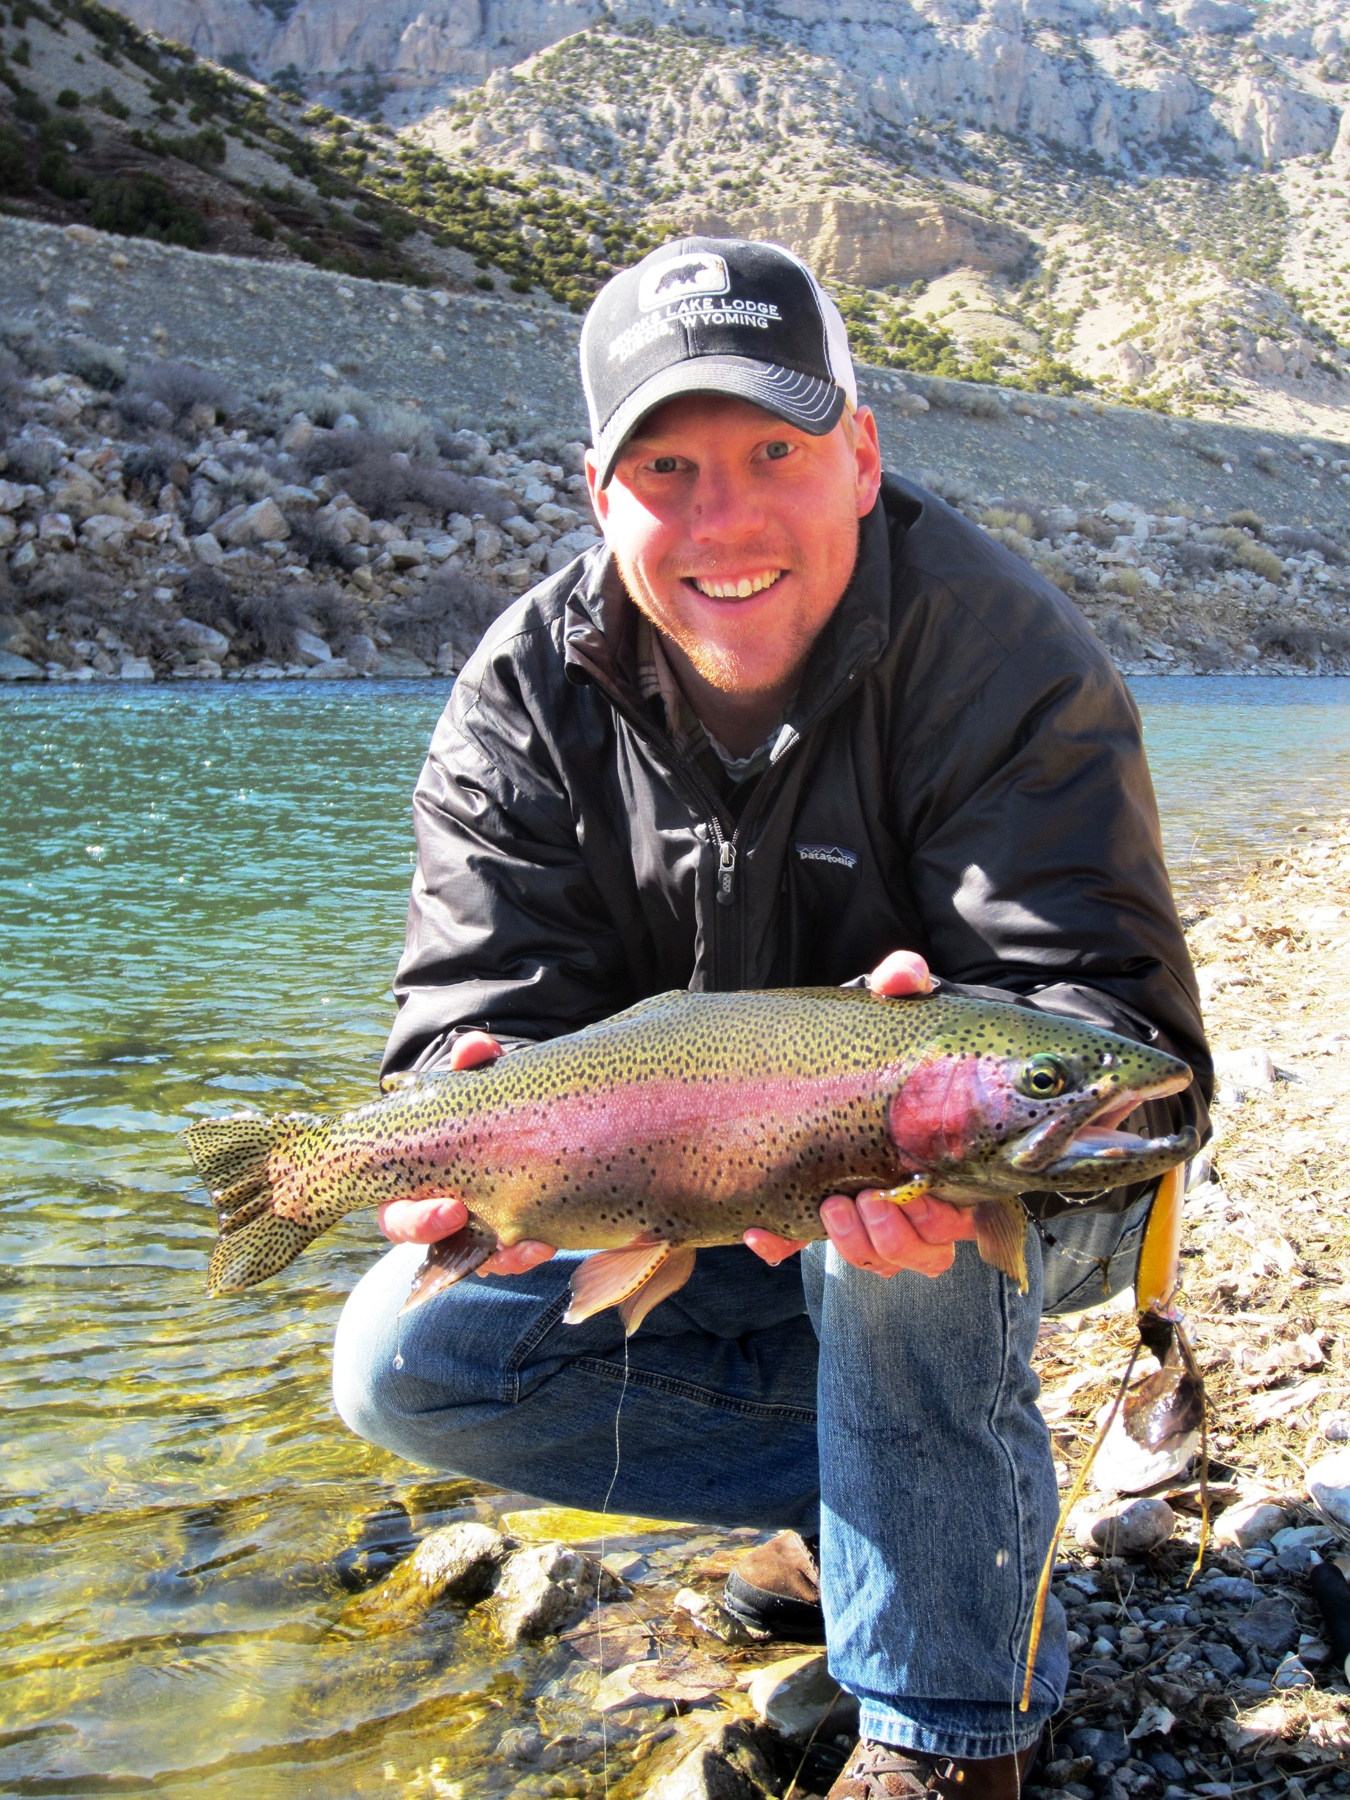 As an avid fisherman, Brooks Lake Lodge’s GM Adam Long loves to hear guest’s fishing stories and created the “Frequent Fly-ers” package to take advantage of the special outdoor sporting experience.